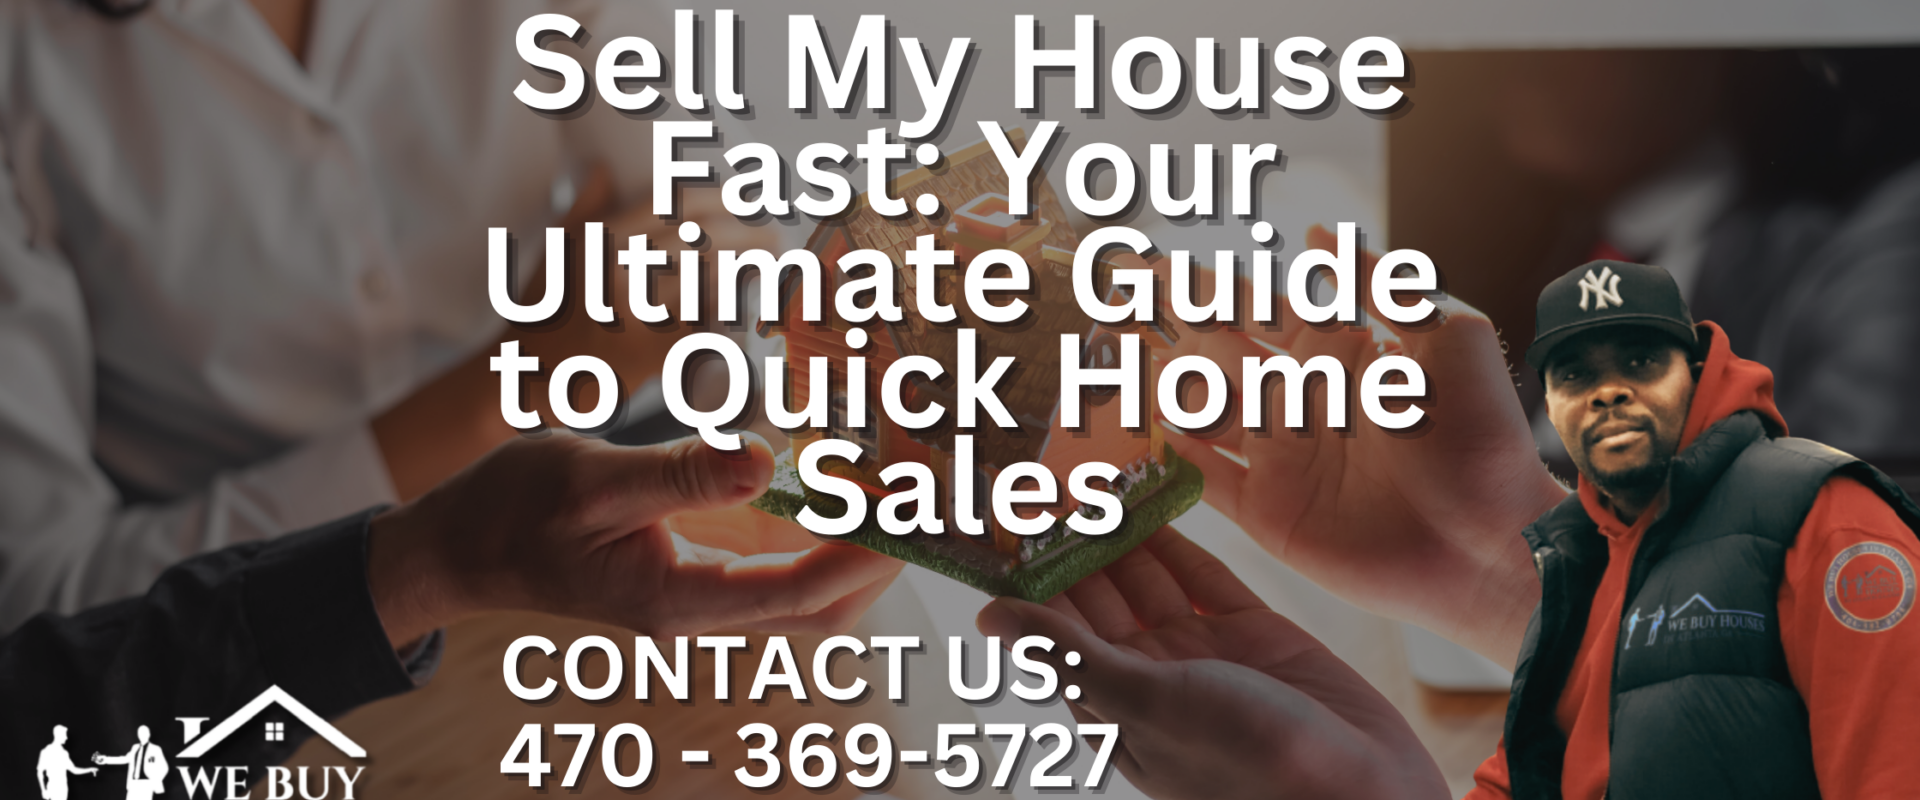 Sell My House Fast: Your Ultimate Guide to Quick Home Sales